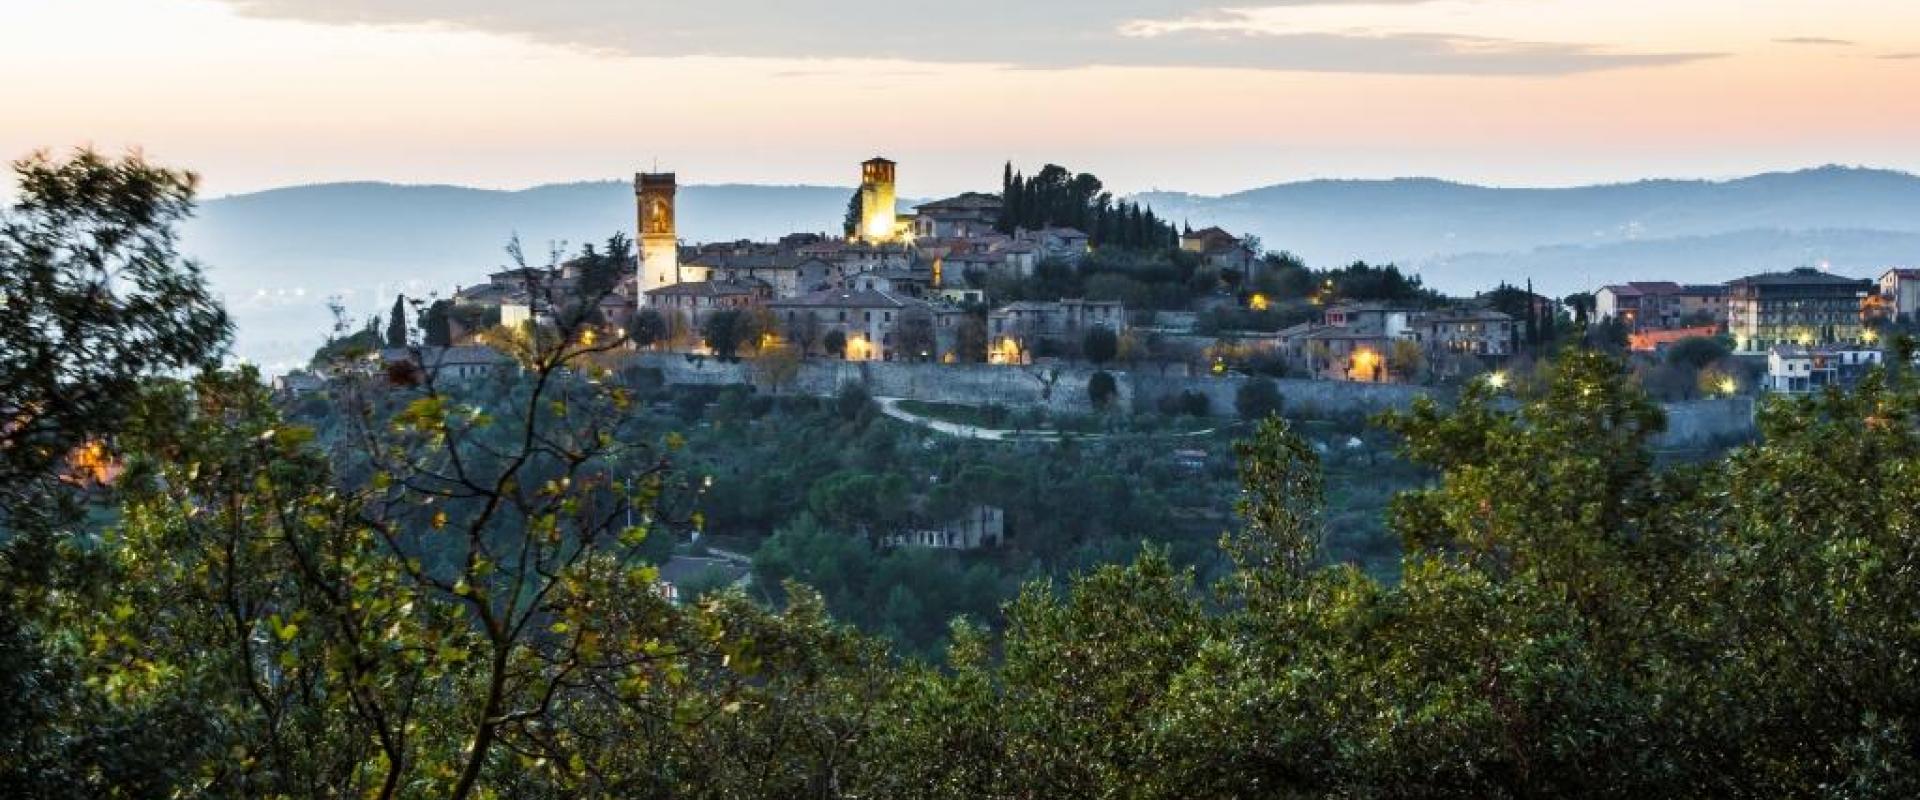 Guided tour of Corciano in umbria